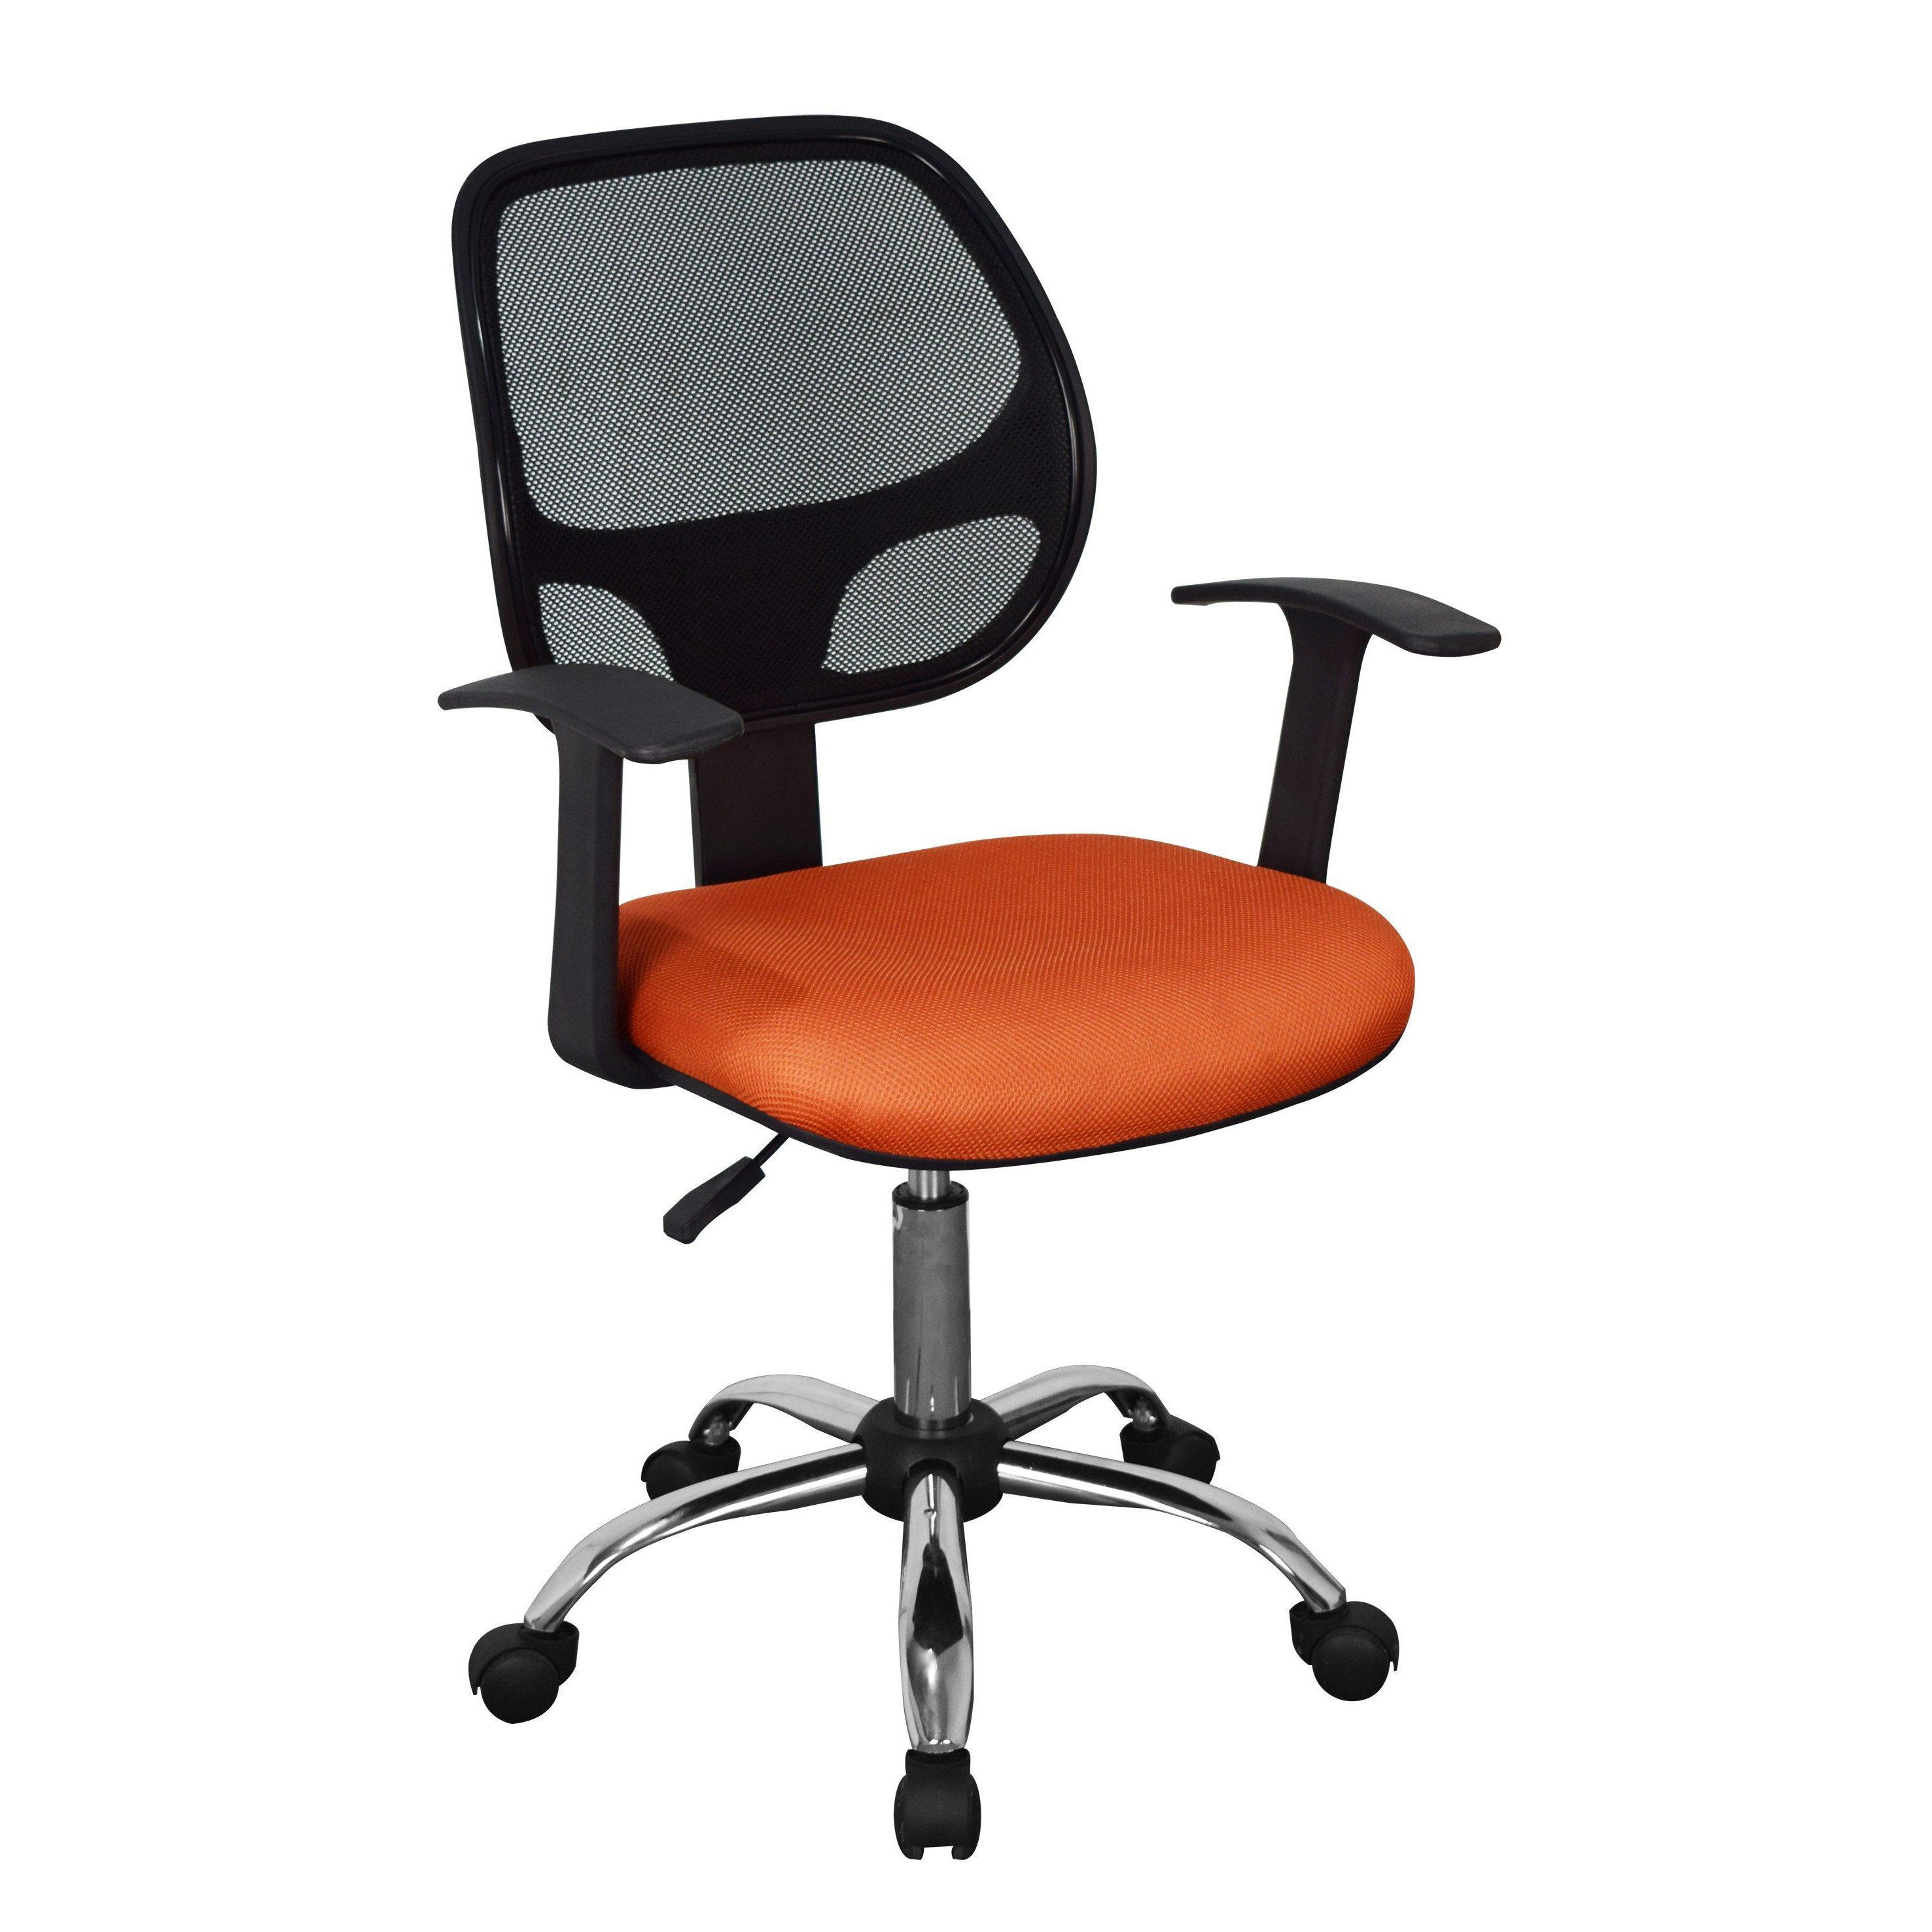 Loft Home Office Home Office Chair, Black Mesh Back, Orange Fabric Seat With Chrome Base - image 1